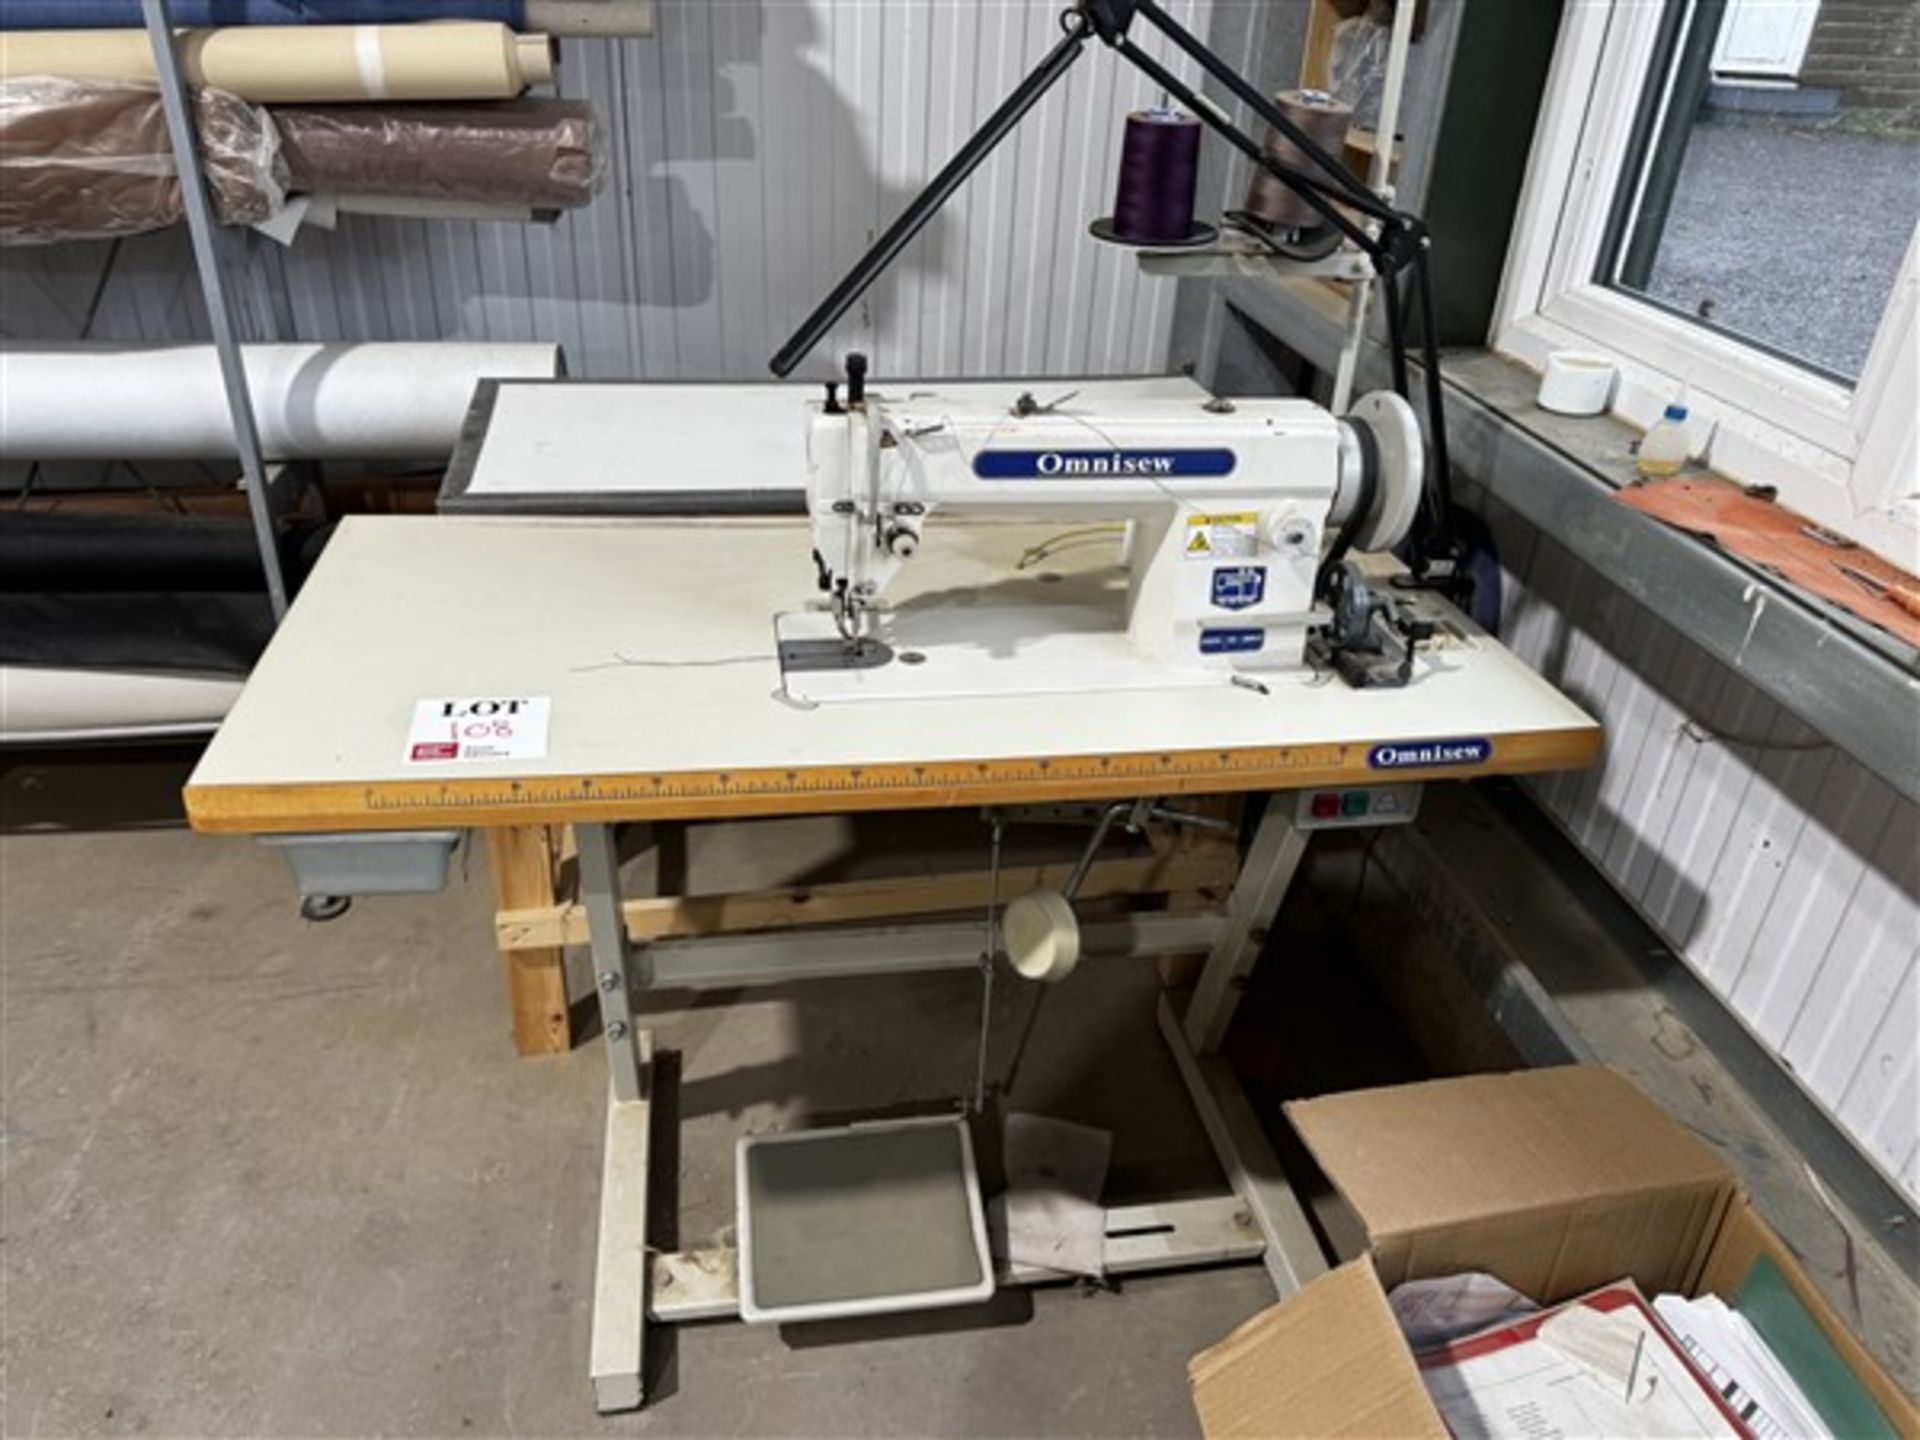 Omnisew flat bed sewing machine